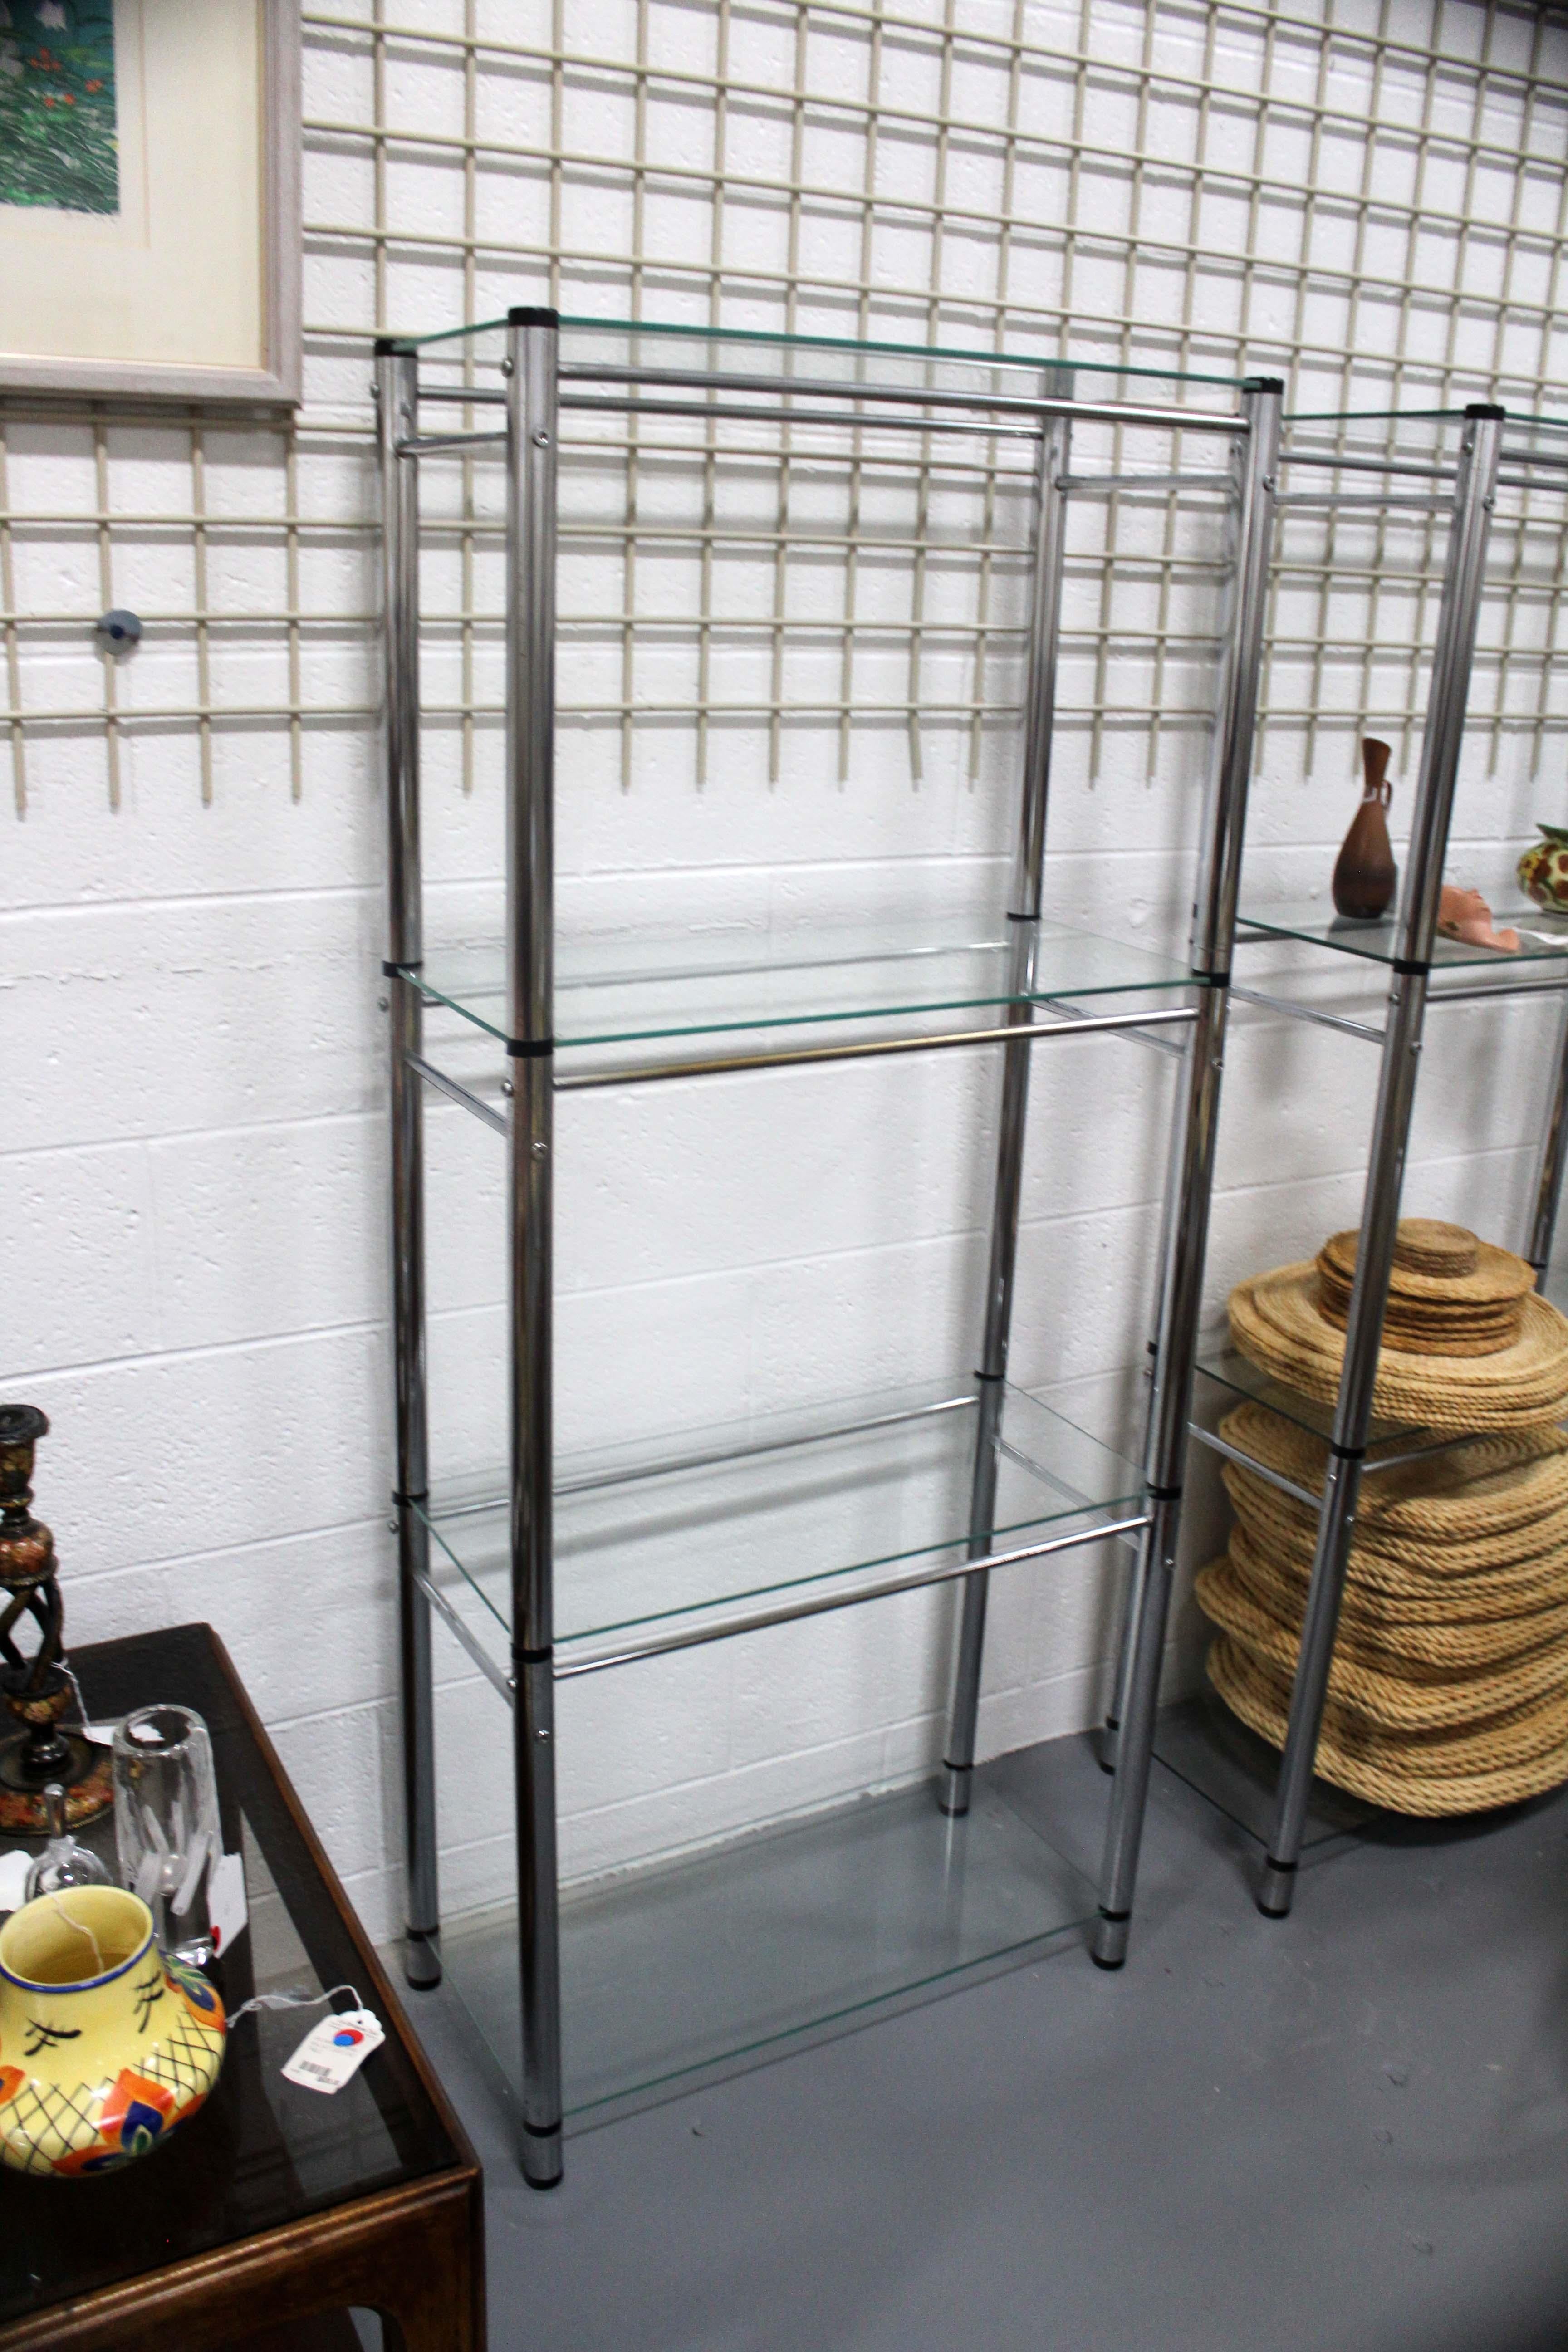 For your consideration is this pair of vintage chrome and glass etagere shelving units. Dimensions: 26